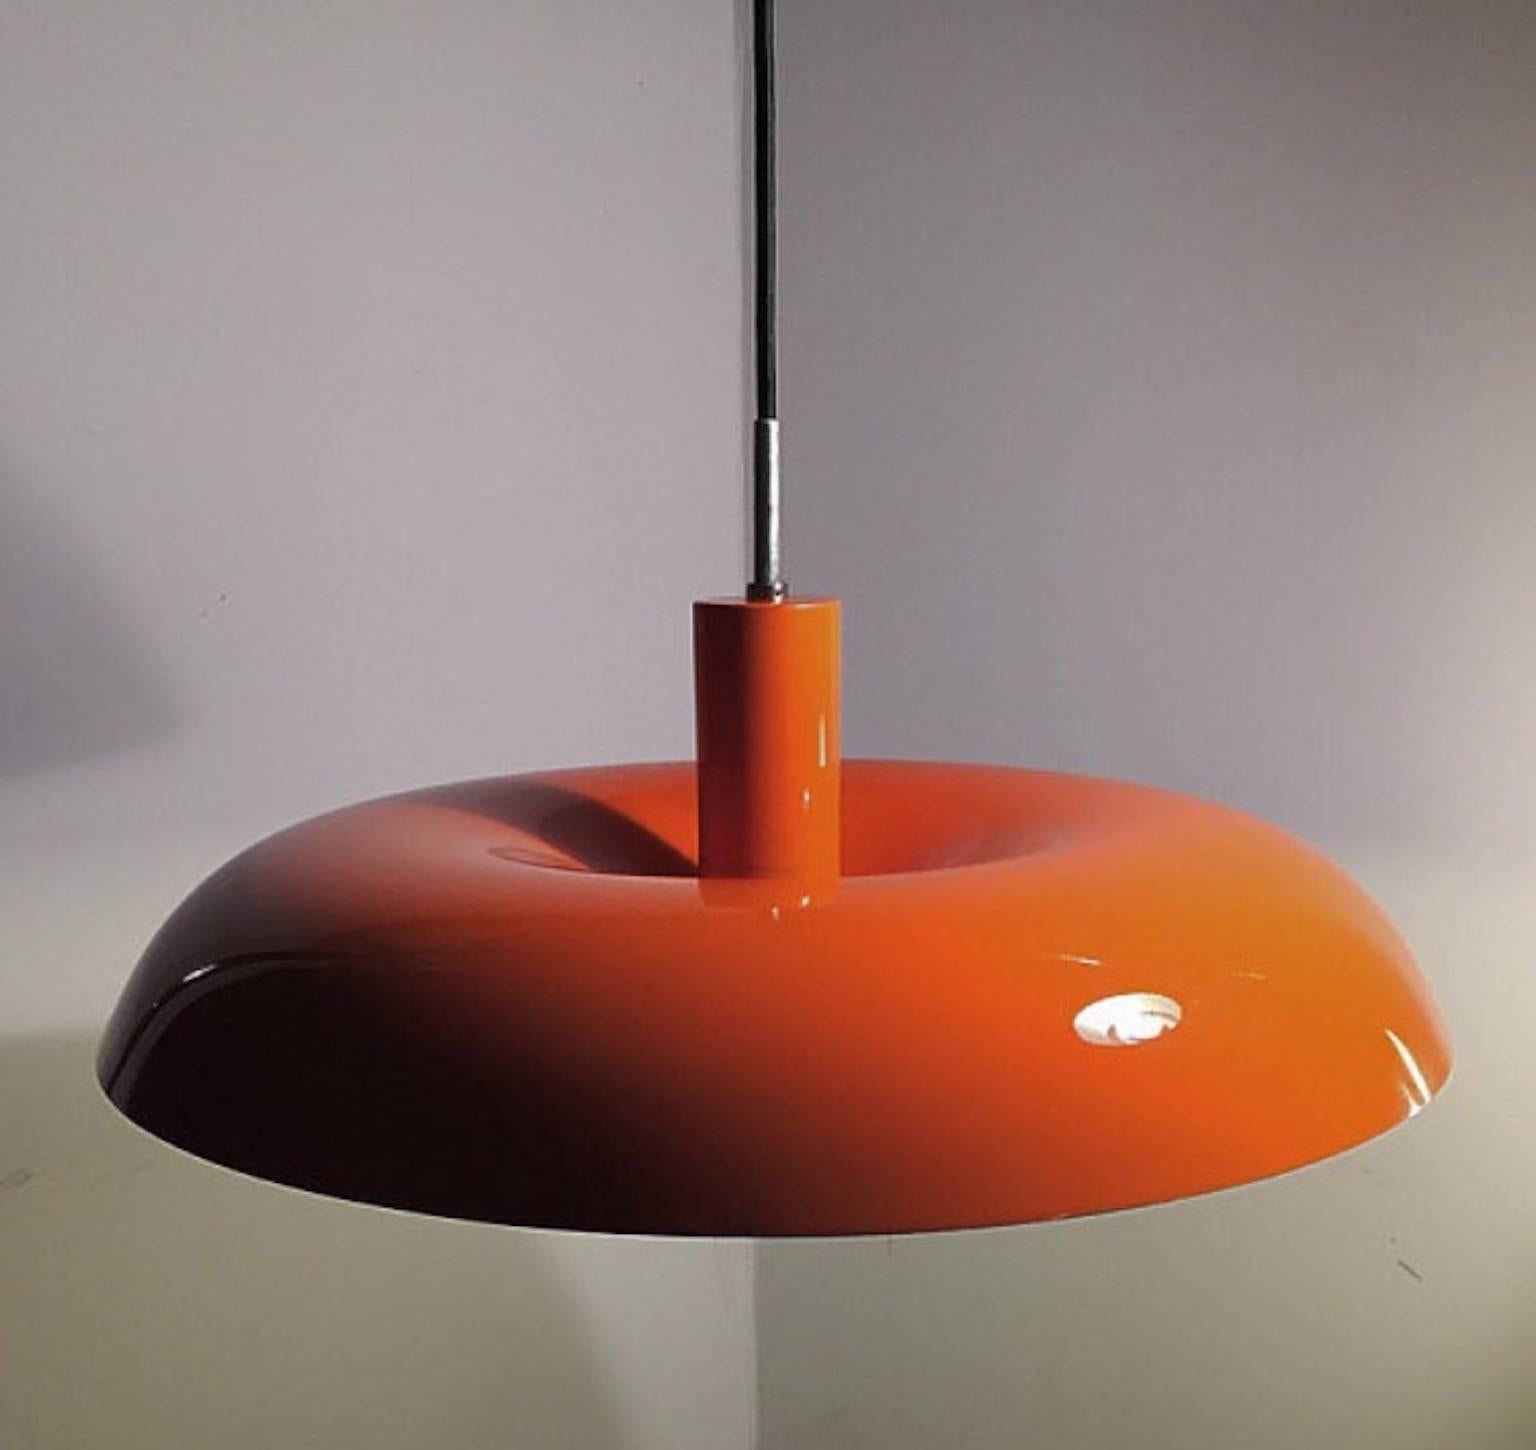 Piet Hein, the Dane who has achieved world renown as a theorist, inventor and poet, originally created this amazing lamp for Lyfa in 1969.

The design was made decades before (1931) and Piet Hein named the lamp Ra after the achient Egyptian sun